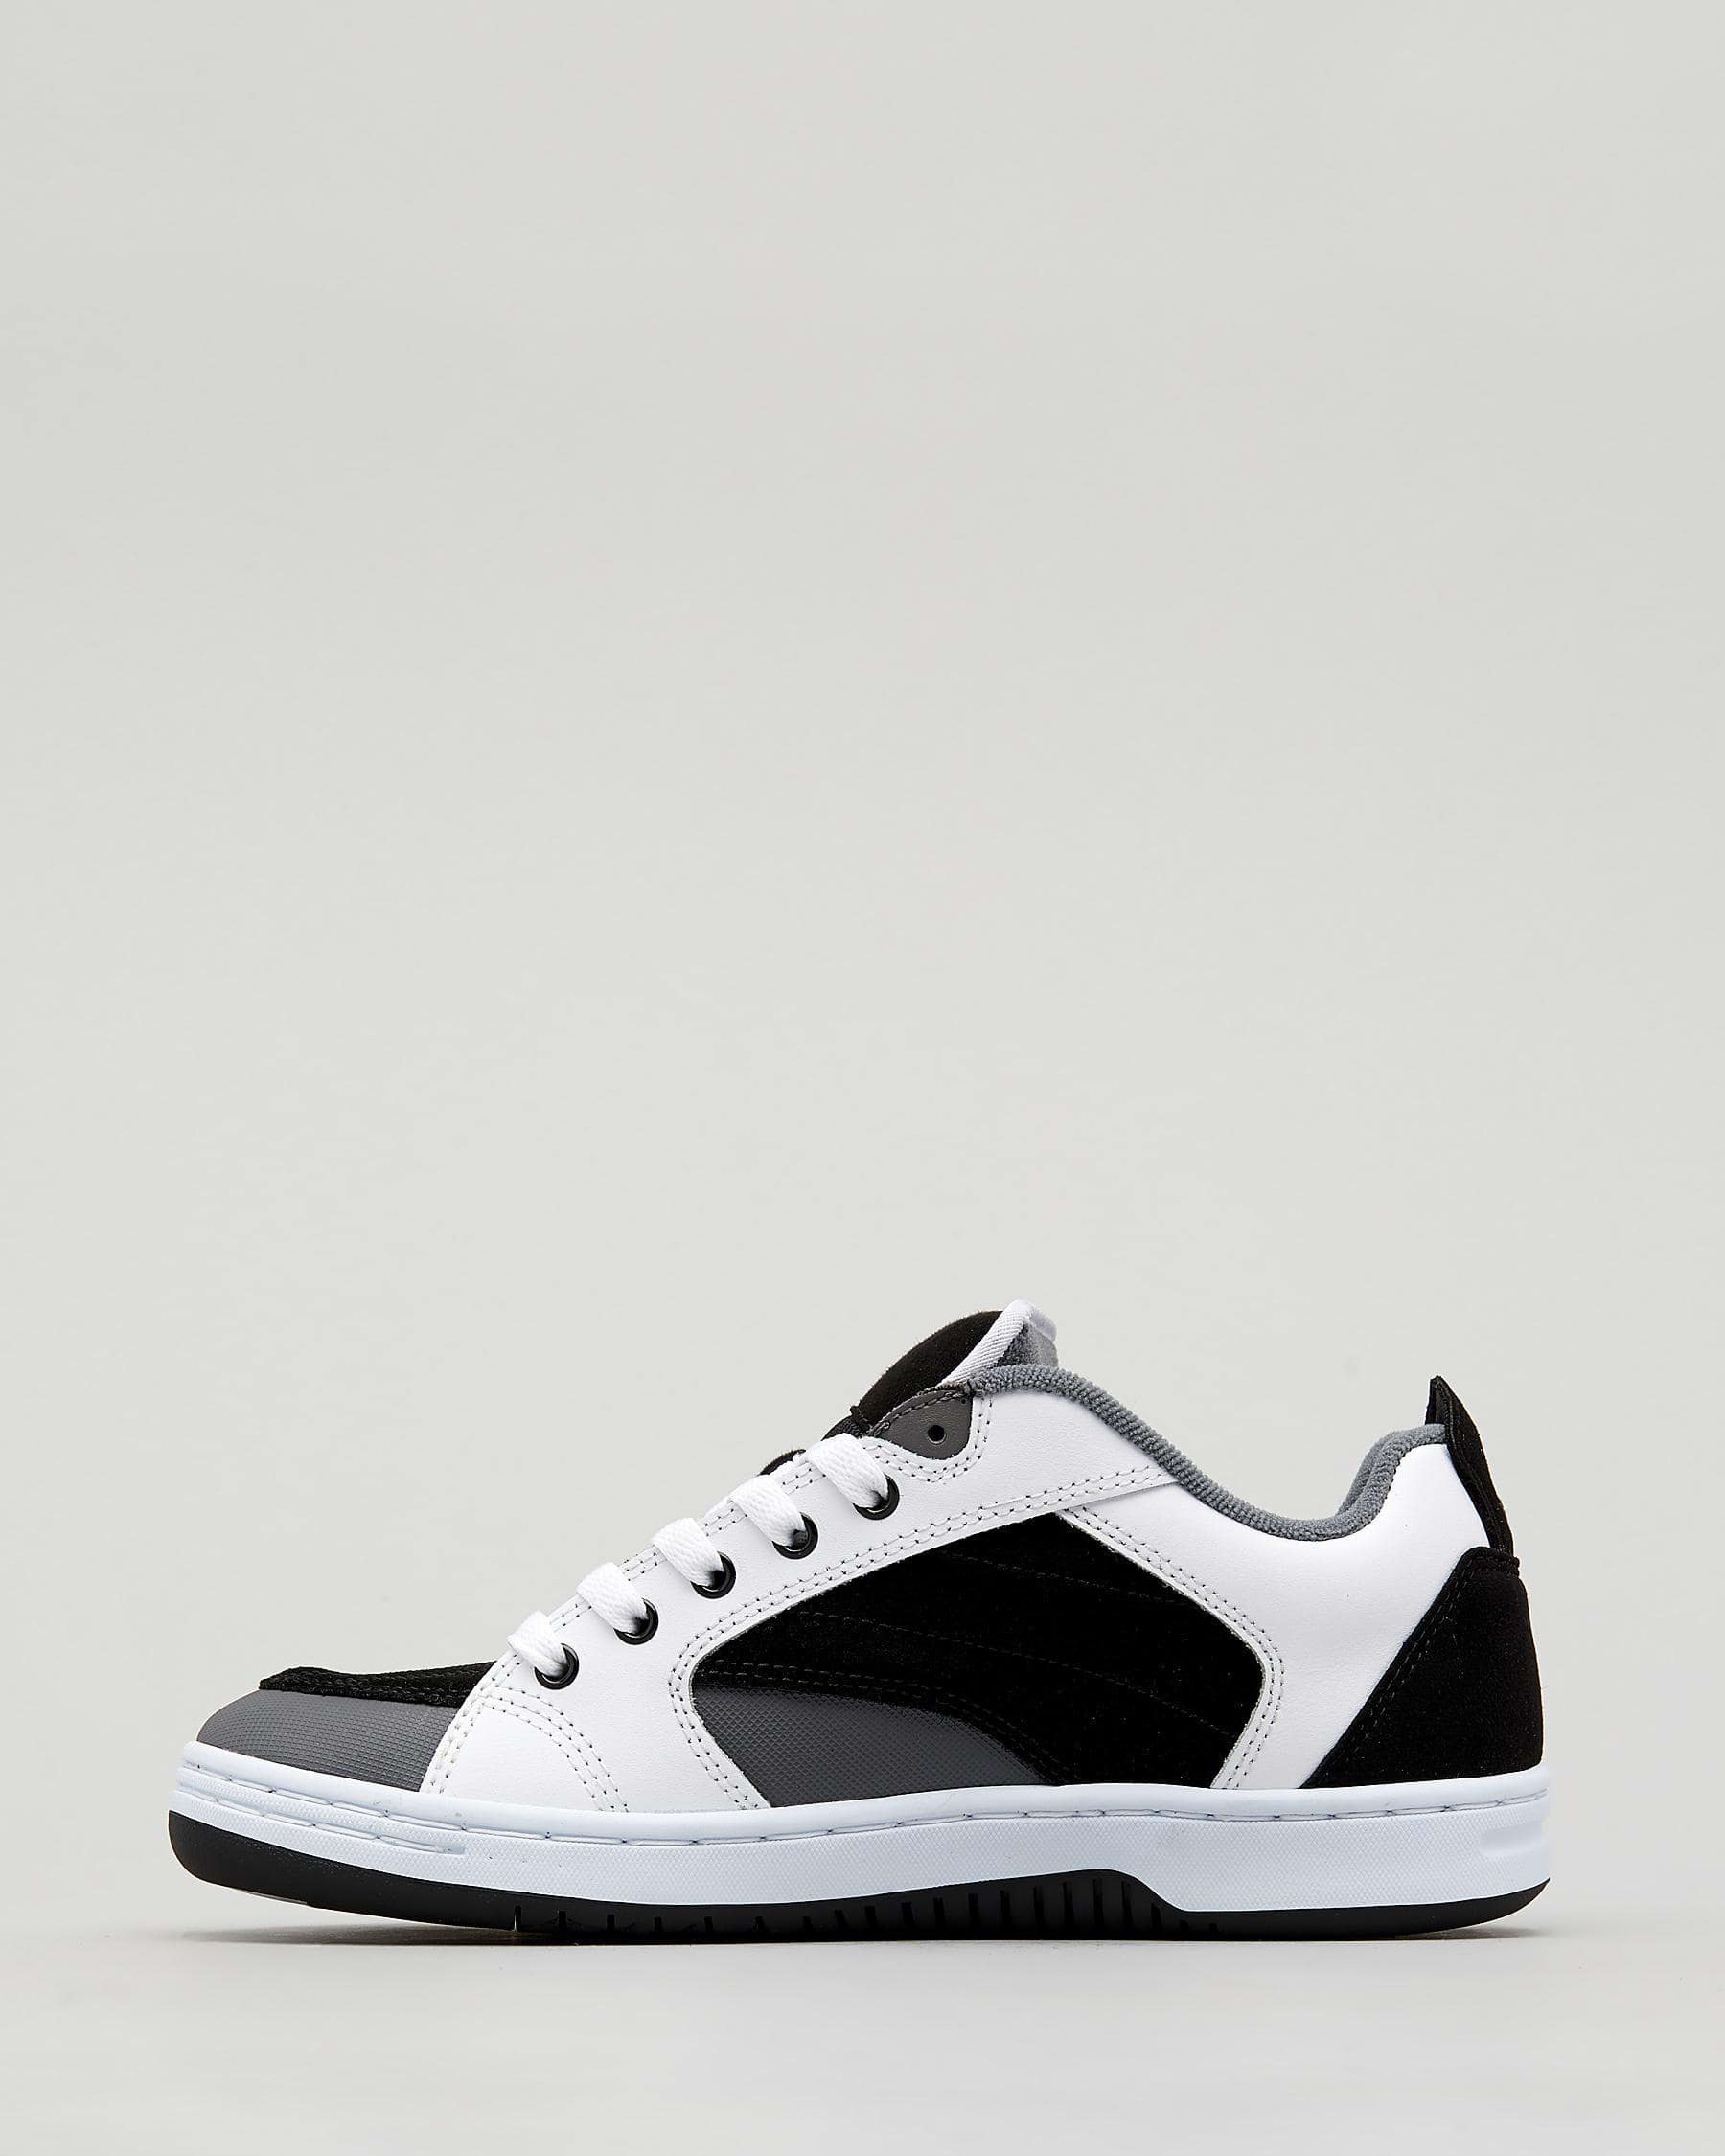 Shop Etnies Czar Shoes In White/black/grey - Fast Shipping & Easy ...